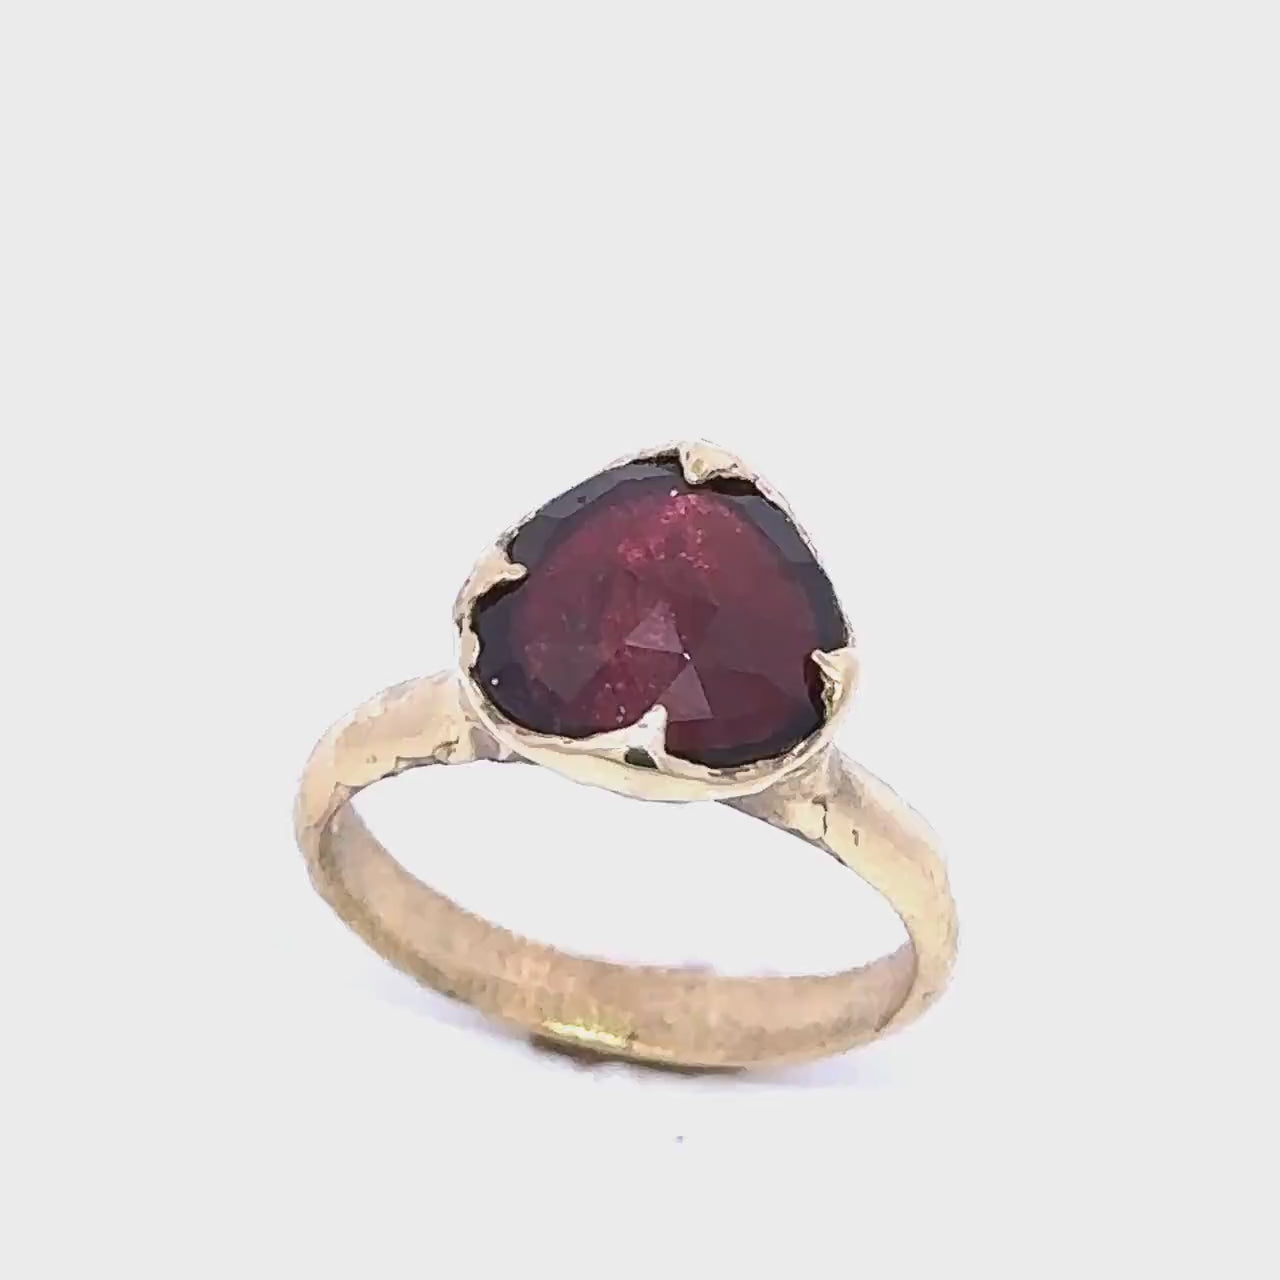 Fancy cut red Tourmaline Yellow Gold Ring Gemstone Solitaire recycled 18k statement cocktail statement 3276